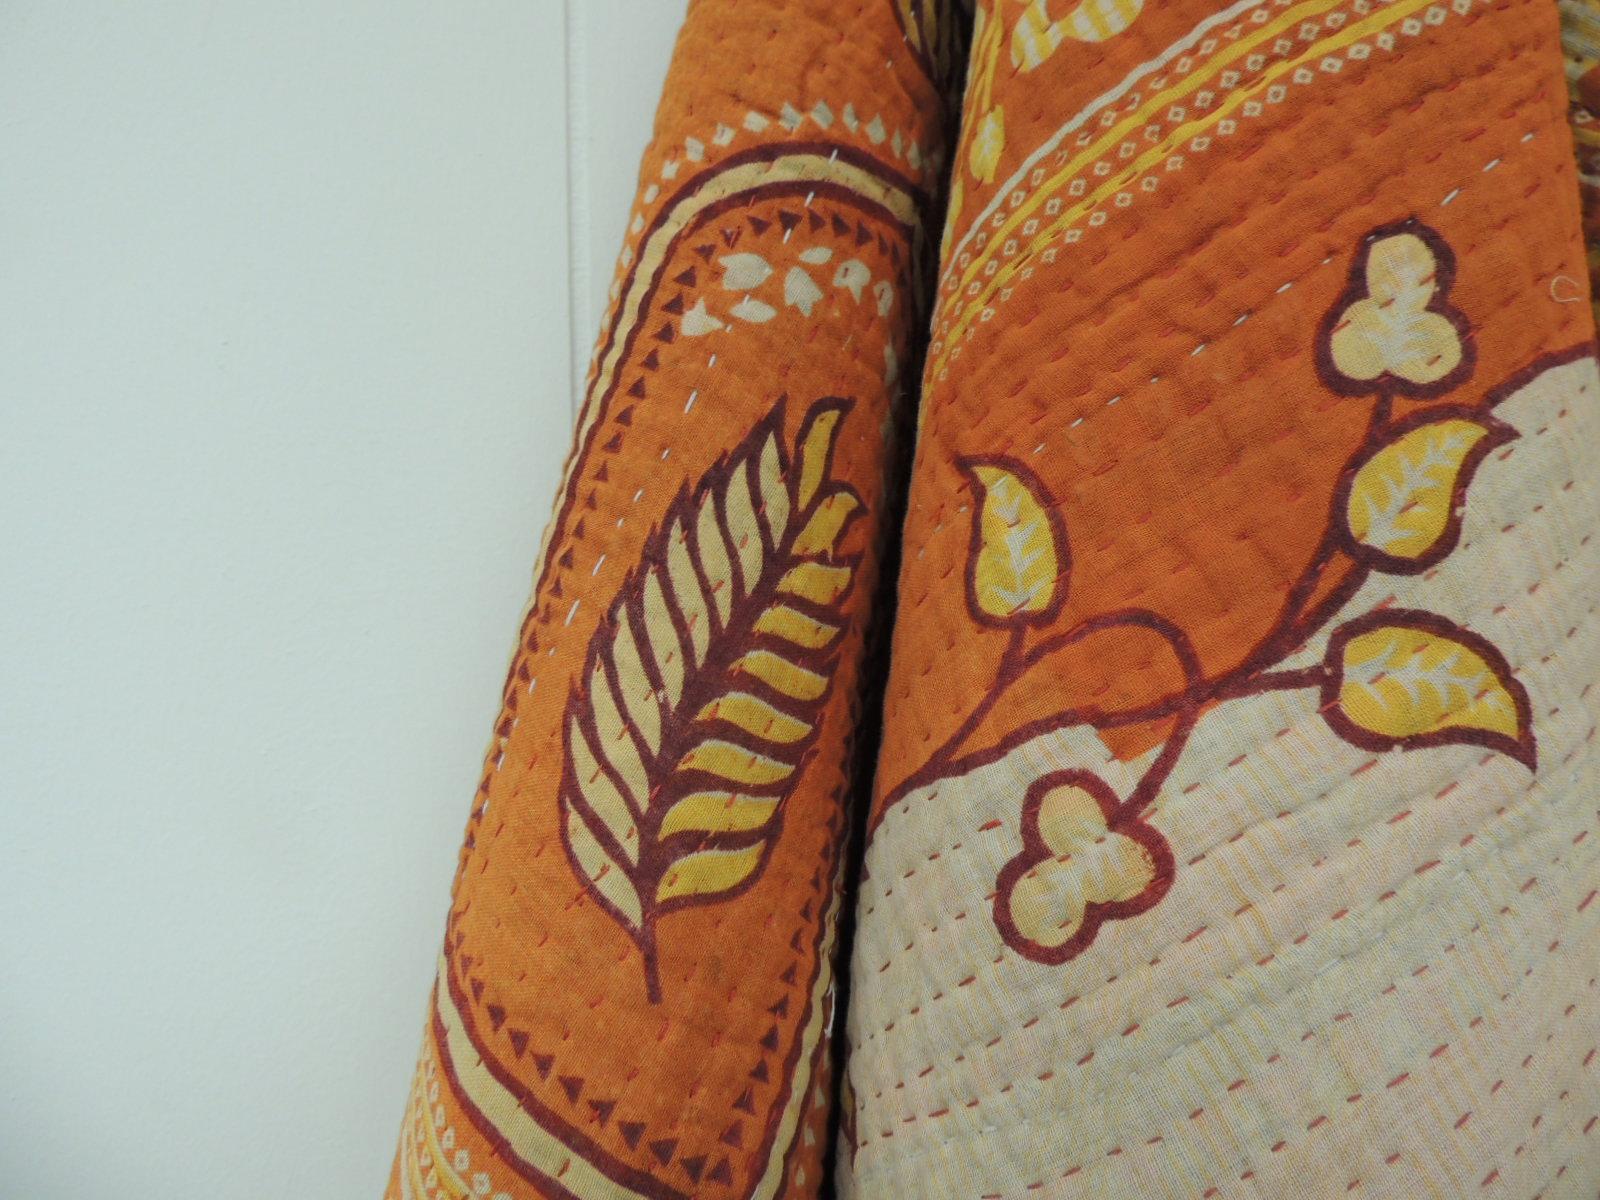 Vintage orange and red Indian quilted cloth/throw with white and red hand stitched details and artisanal patchwork design.
Lining is pieces of cotton stitch together. Floral design in shades of orange, red, yellow, and white.
Size: 53.5 x